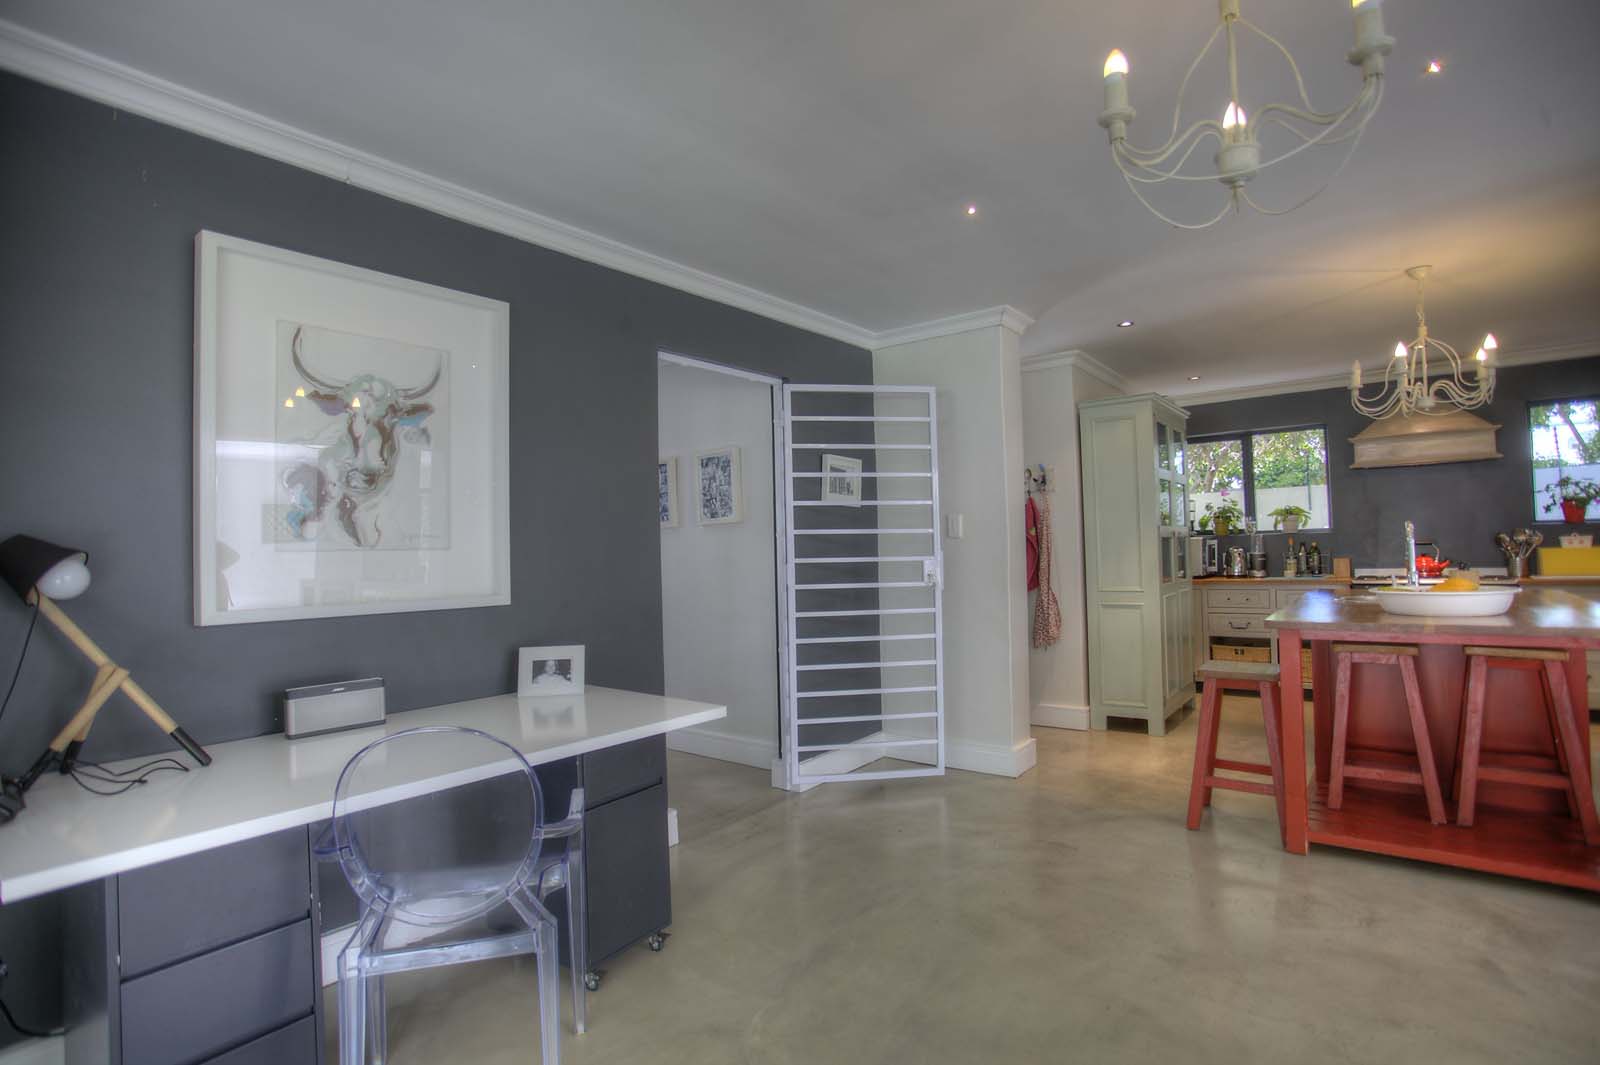 Photo 17 of Villa Robertson accommodation in Constantia, Cape Town with 4 bedrooms and 3 bathrooms